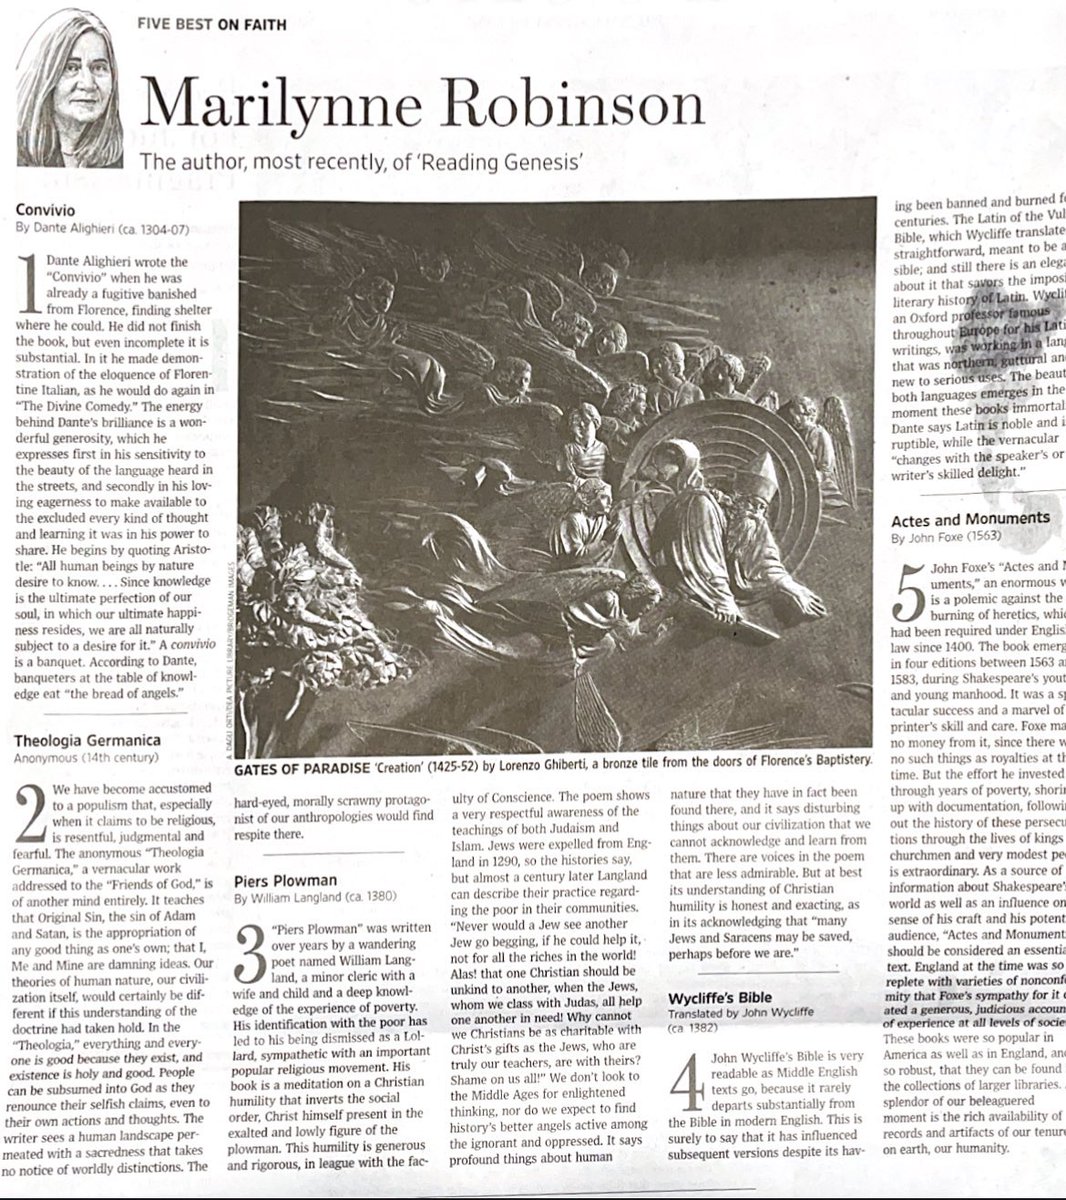 May you be as independent minded as Marilynne Robinson, who when asked by WSJ to recommend 5 books chose only ones published before 1564.